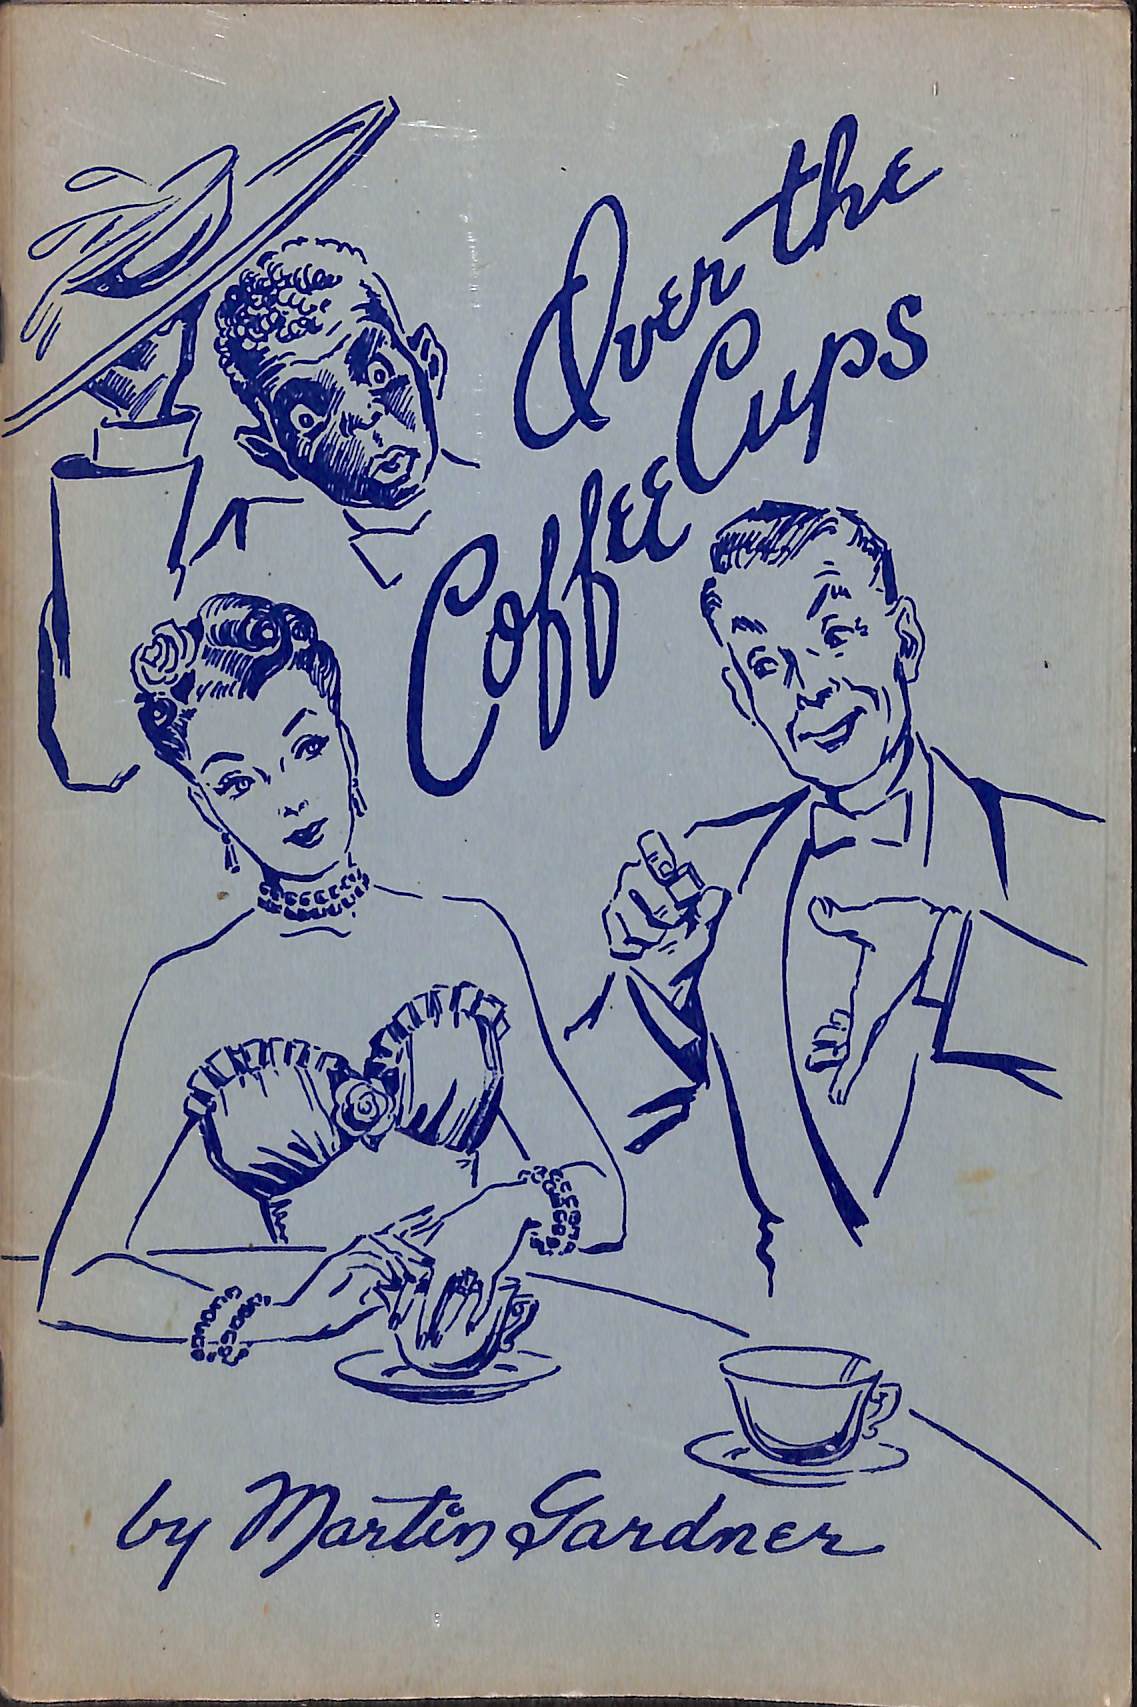 "Over The Coffee Cups" 1949 GARDNER, Martin